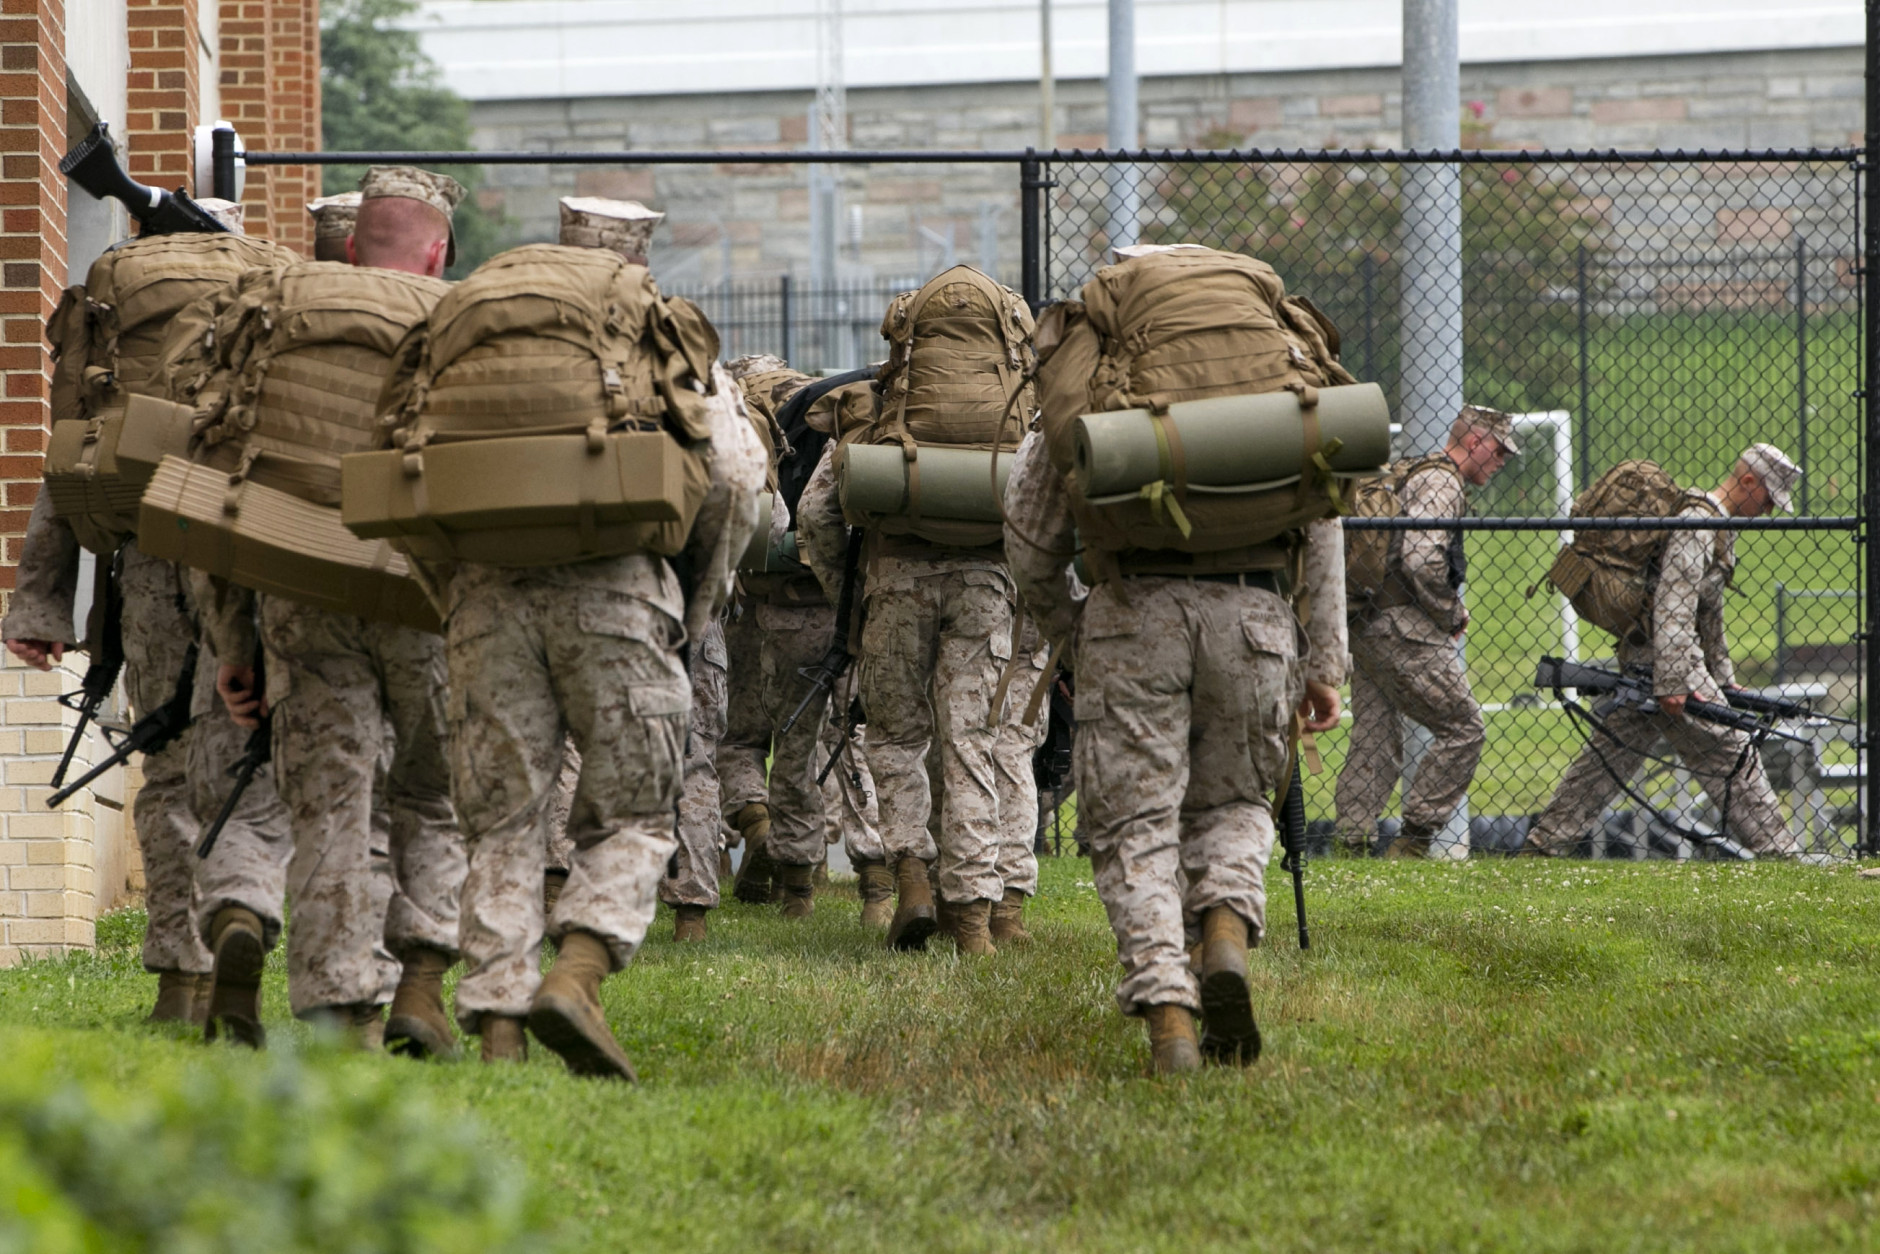 Troops move carrying guns walk at the Navy Yard in Washington, Thursday, July 2, 2015. A lockdown is underway on the entire Washington Navy Yard campus after a report of shots fired. (AP Photo/Jacquelyn Martin)